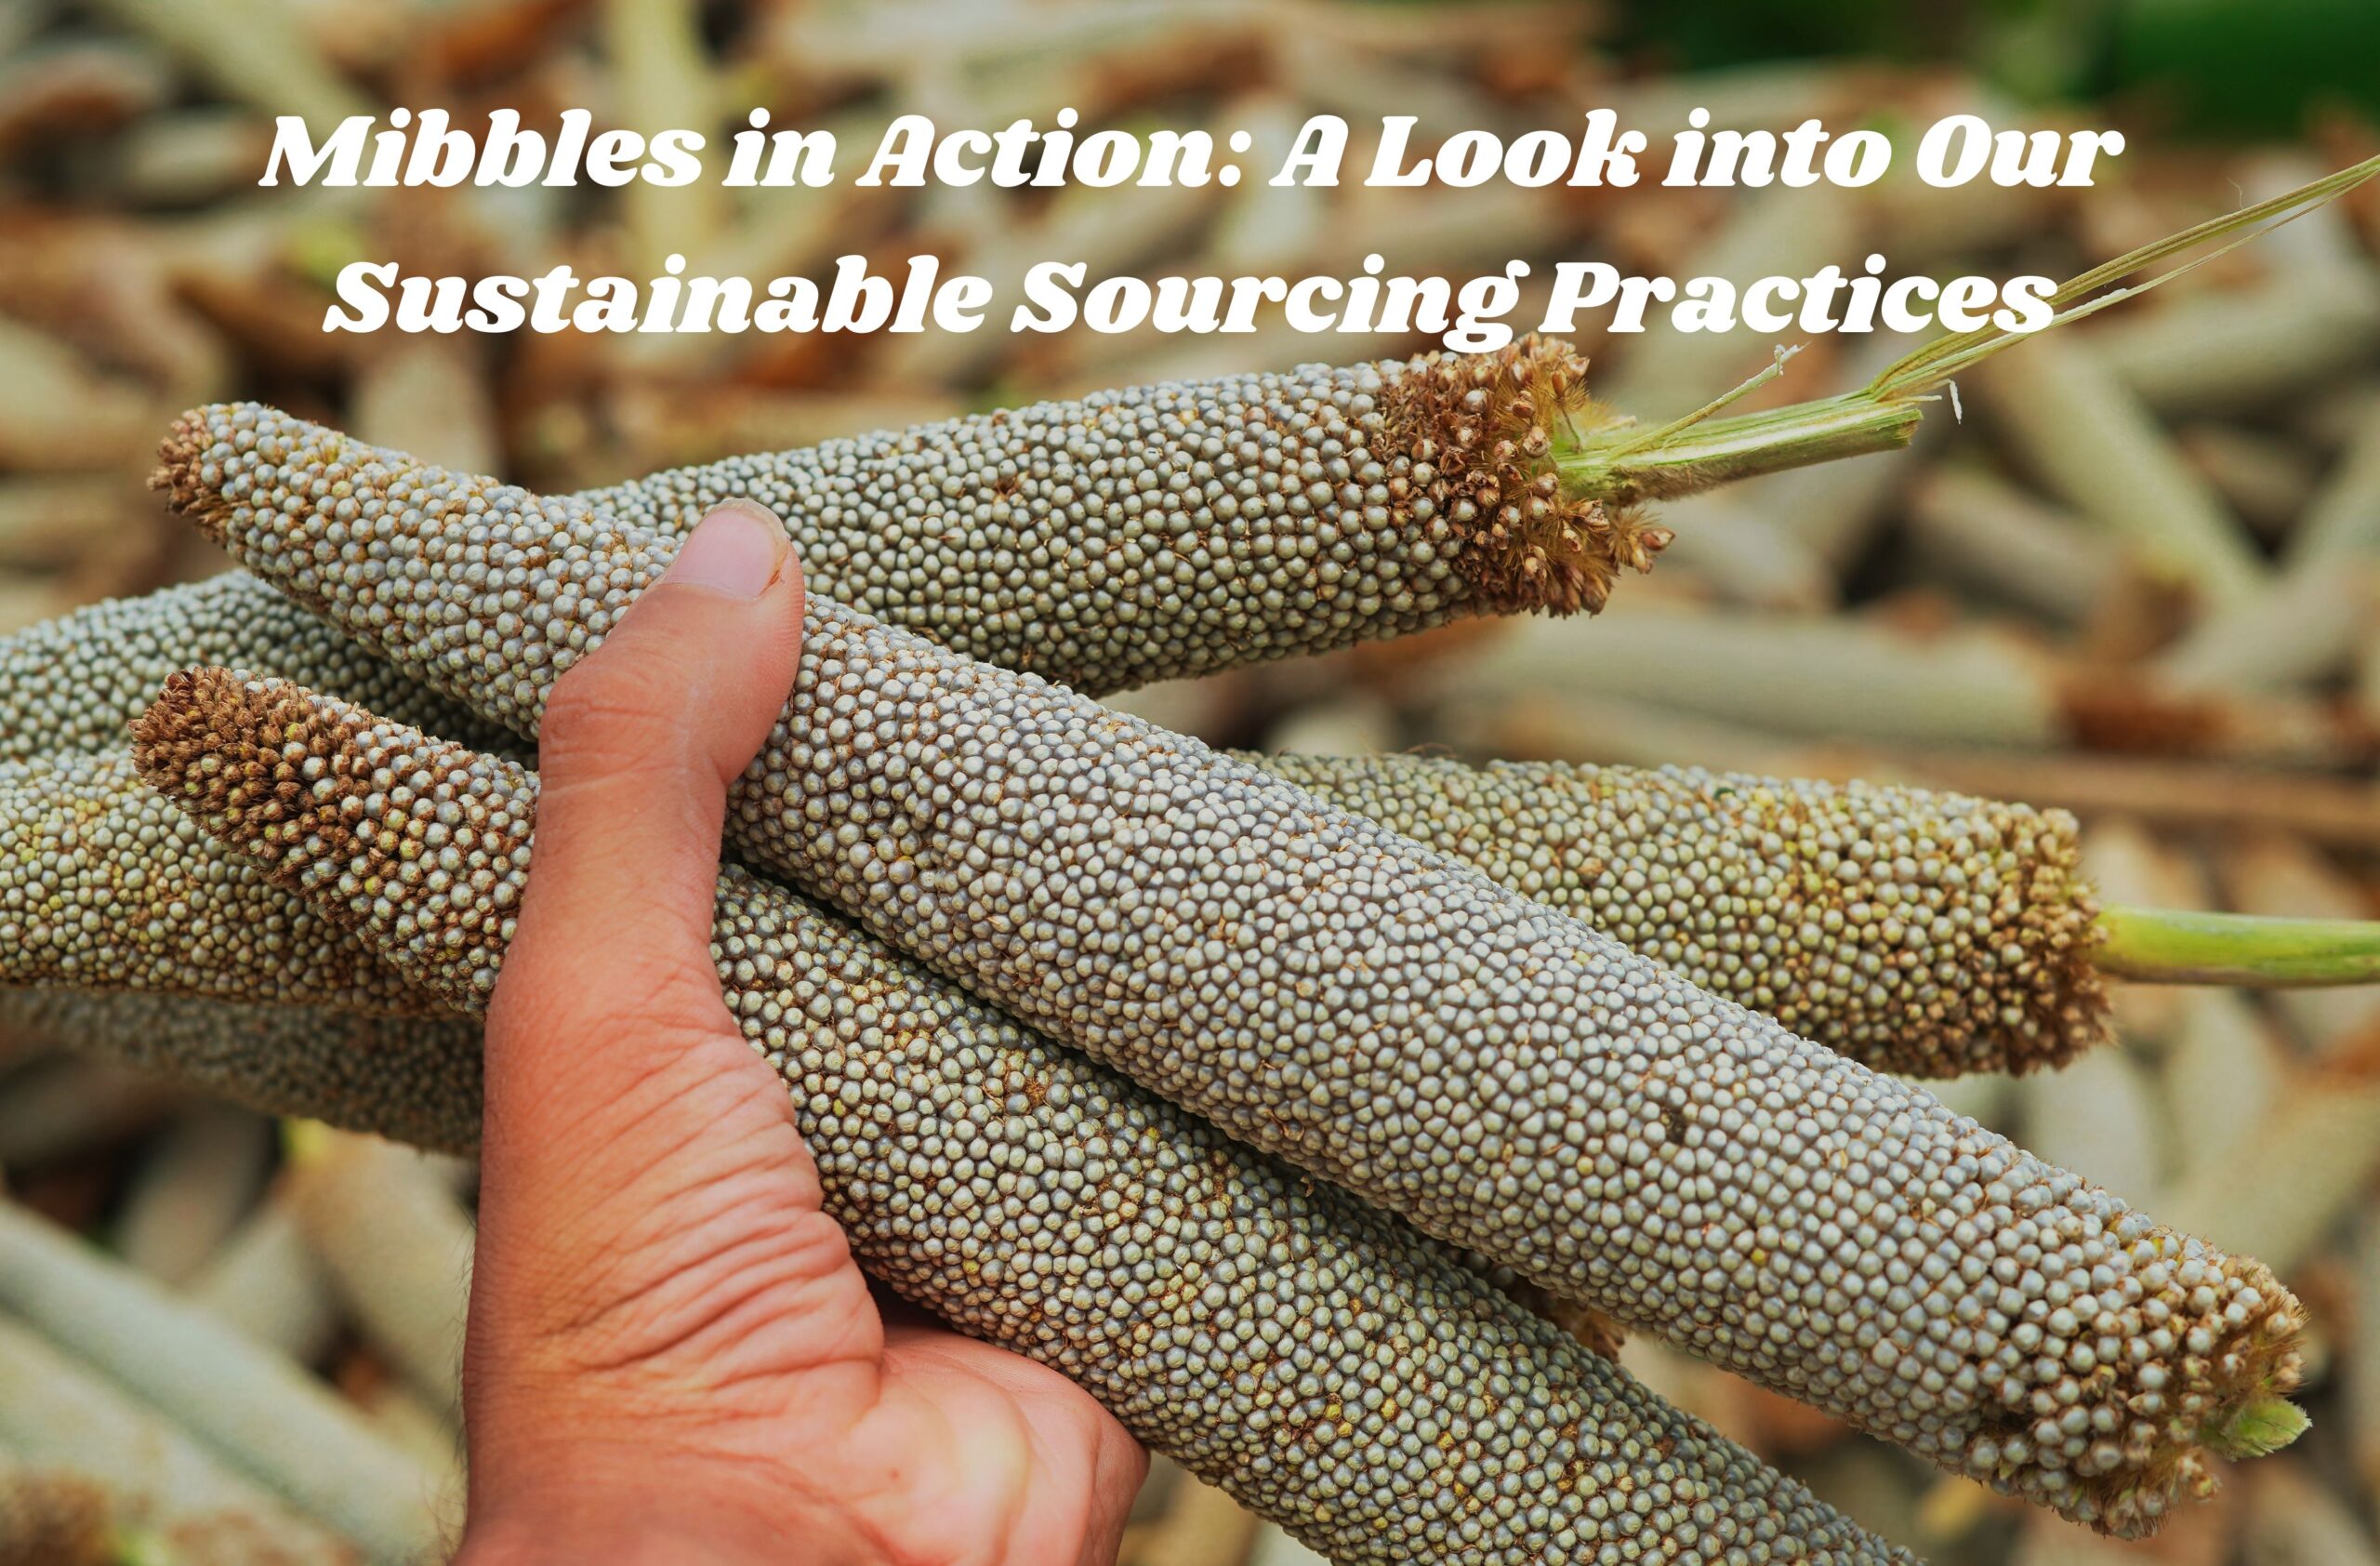 Mibbles in Action: A Look into Our Sustainable Sourcing Practices